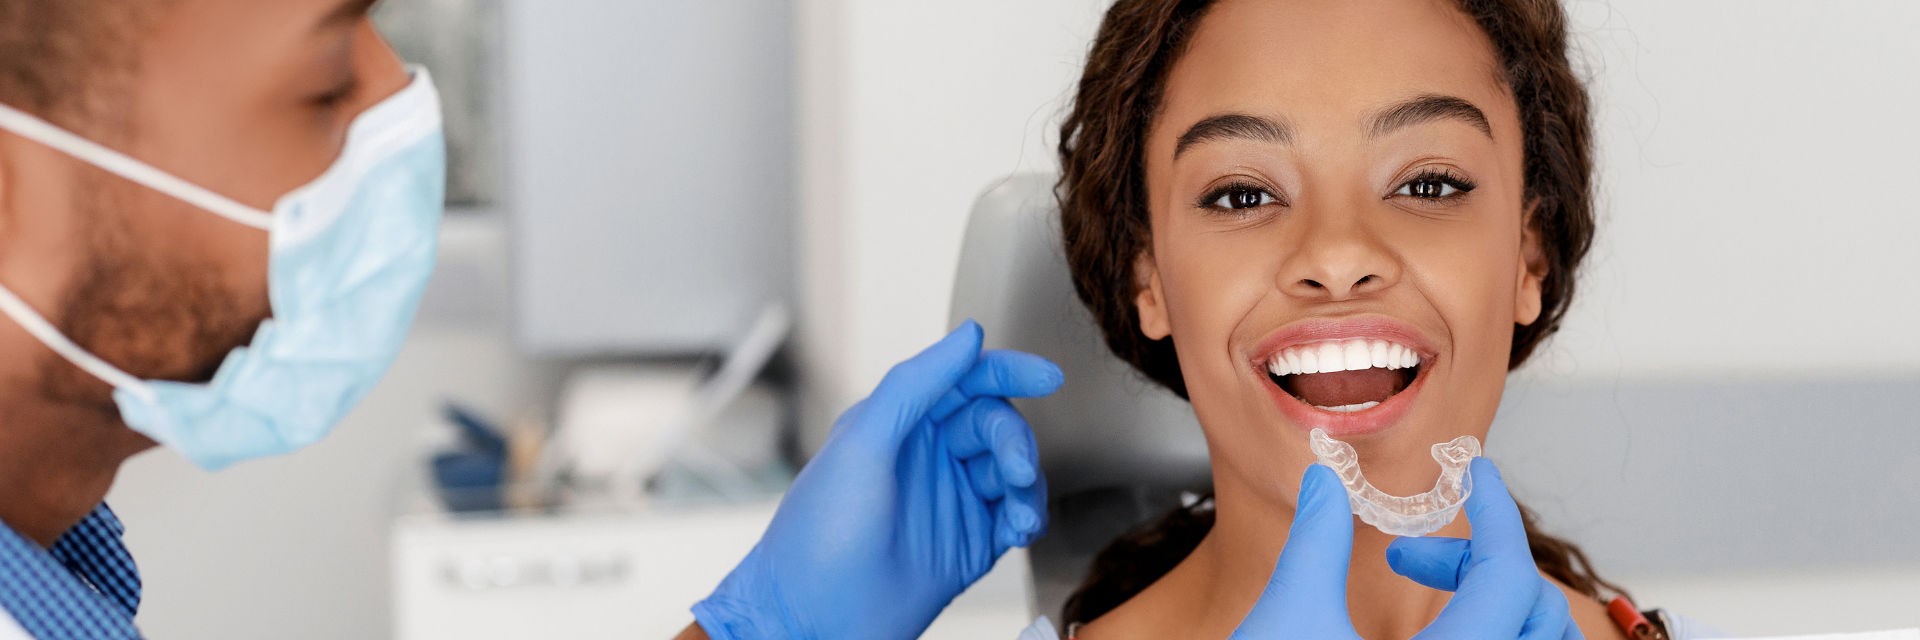 A woman with perfect teeth sitting in a dental chair and an orthodontist with a clear aligner checking the effects of the orthodontic treatment.